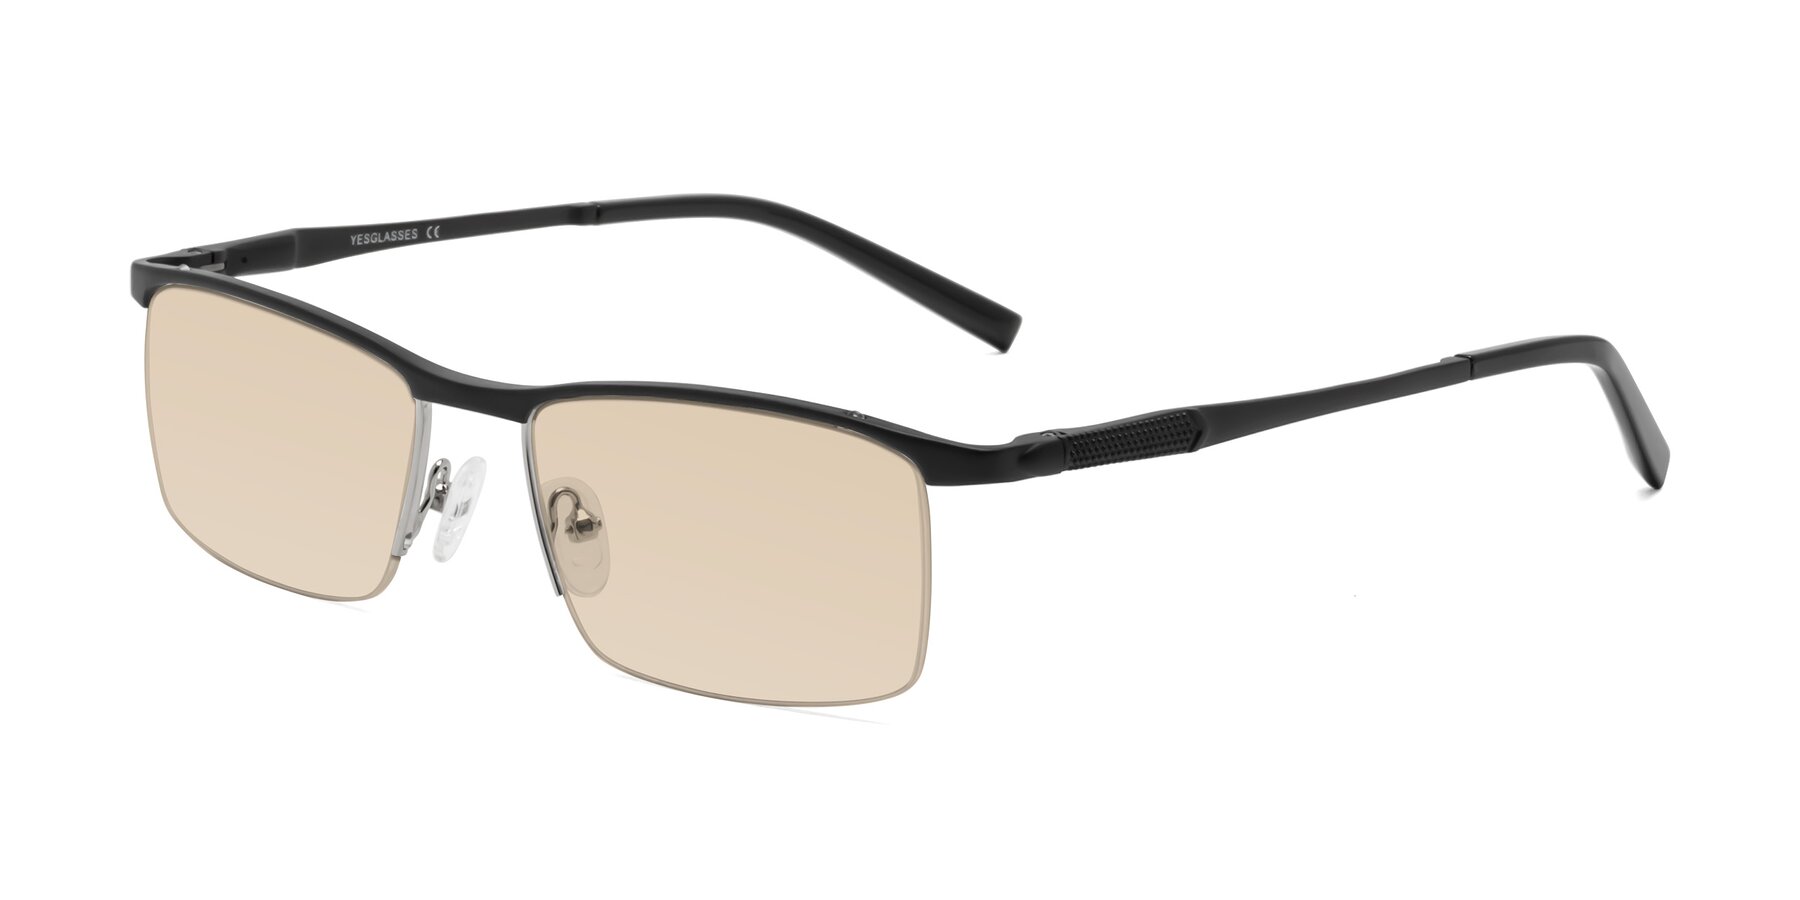 Angle of CX6303 in Black with Light Brown Tinted Lenses